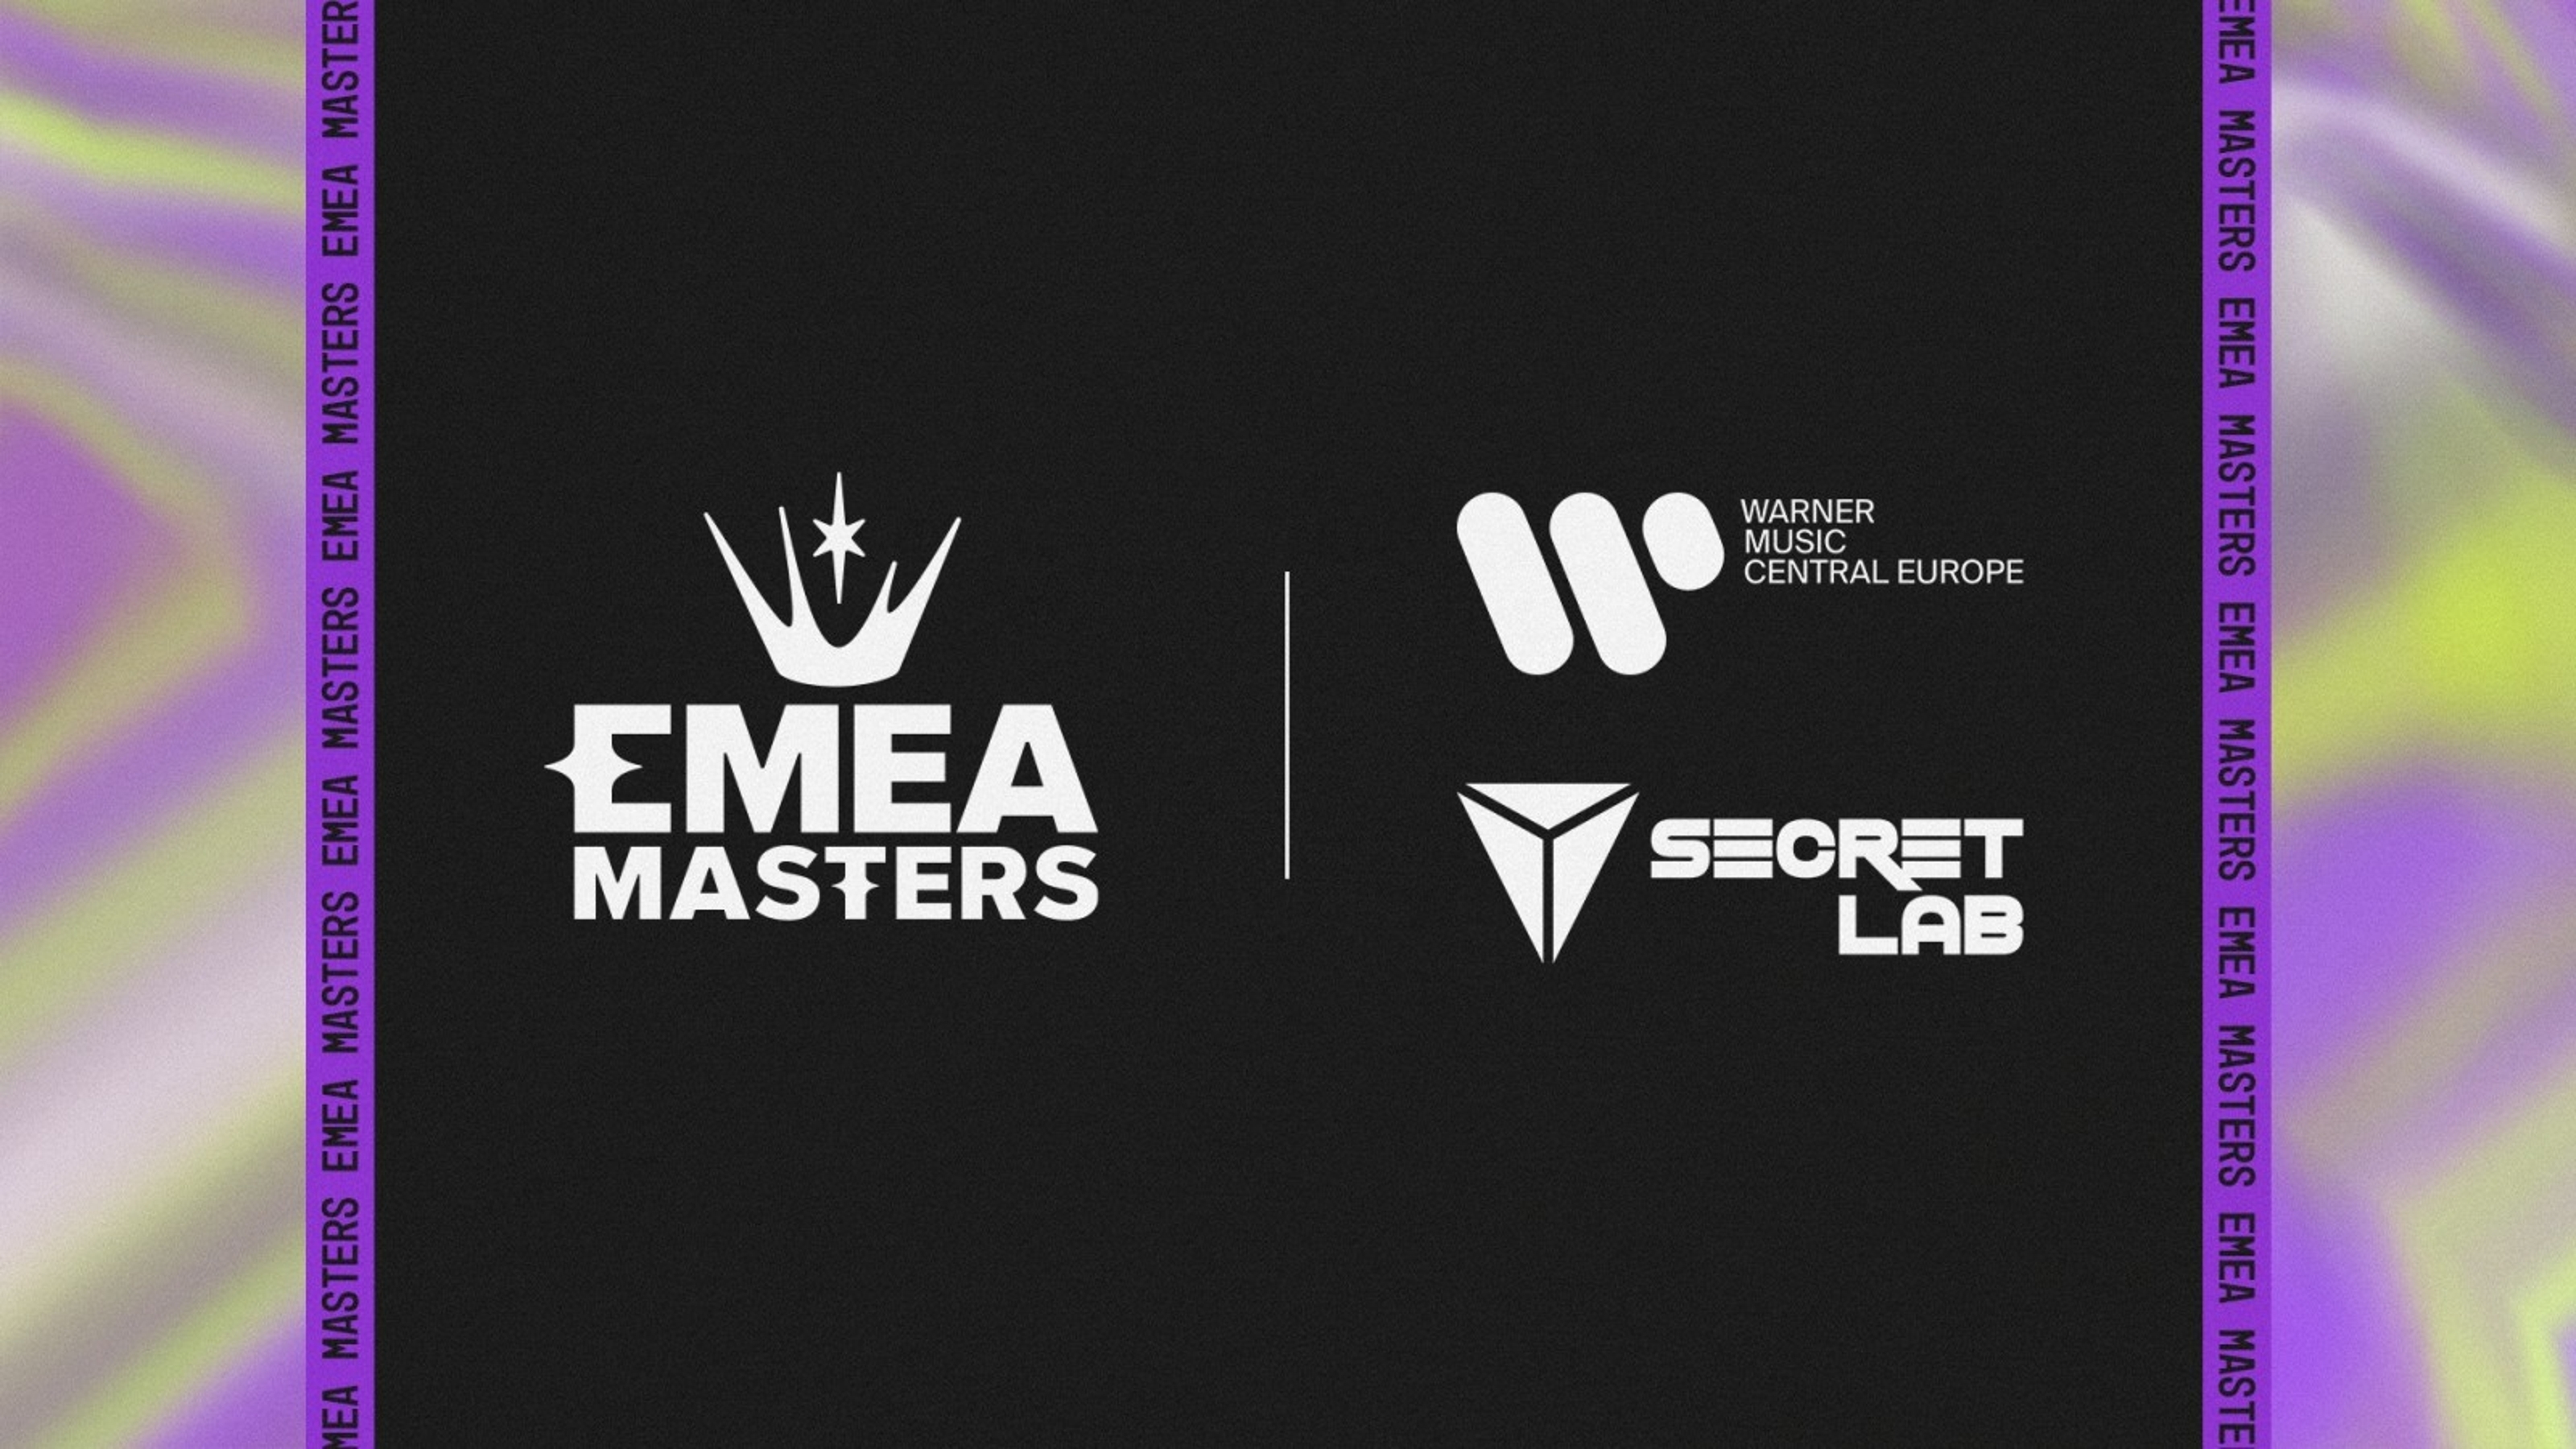 Warner Music and Secret Lab renew alliances with League of Legends EMEA Masters